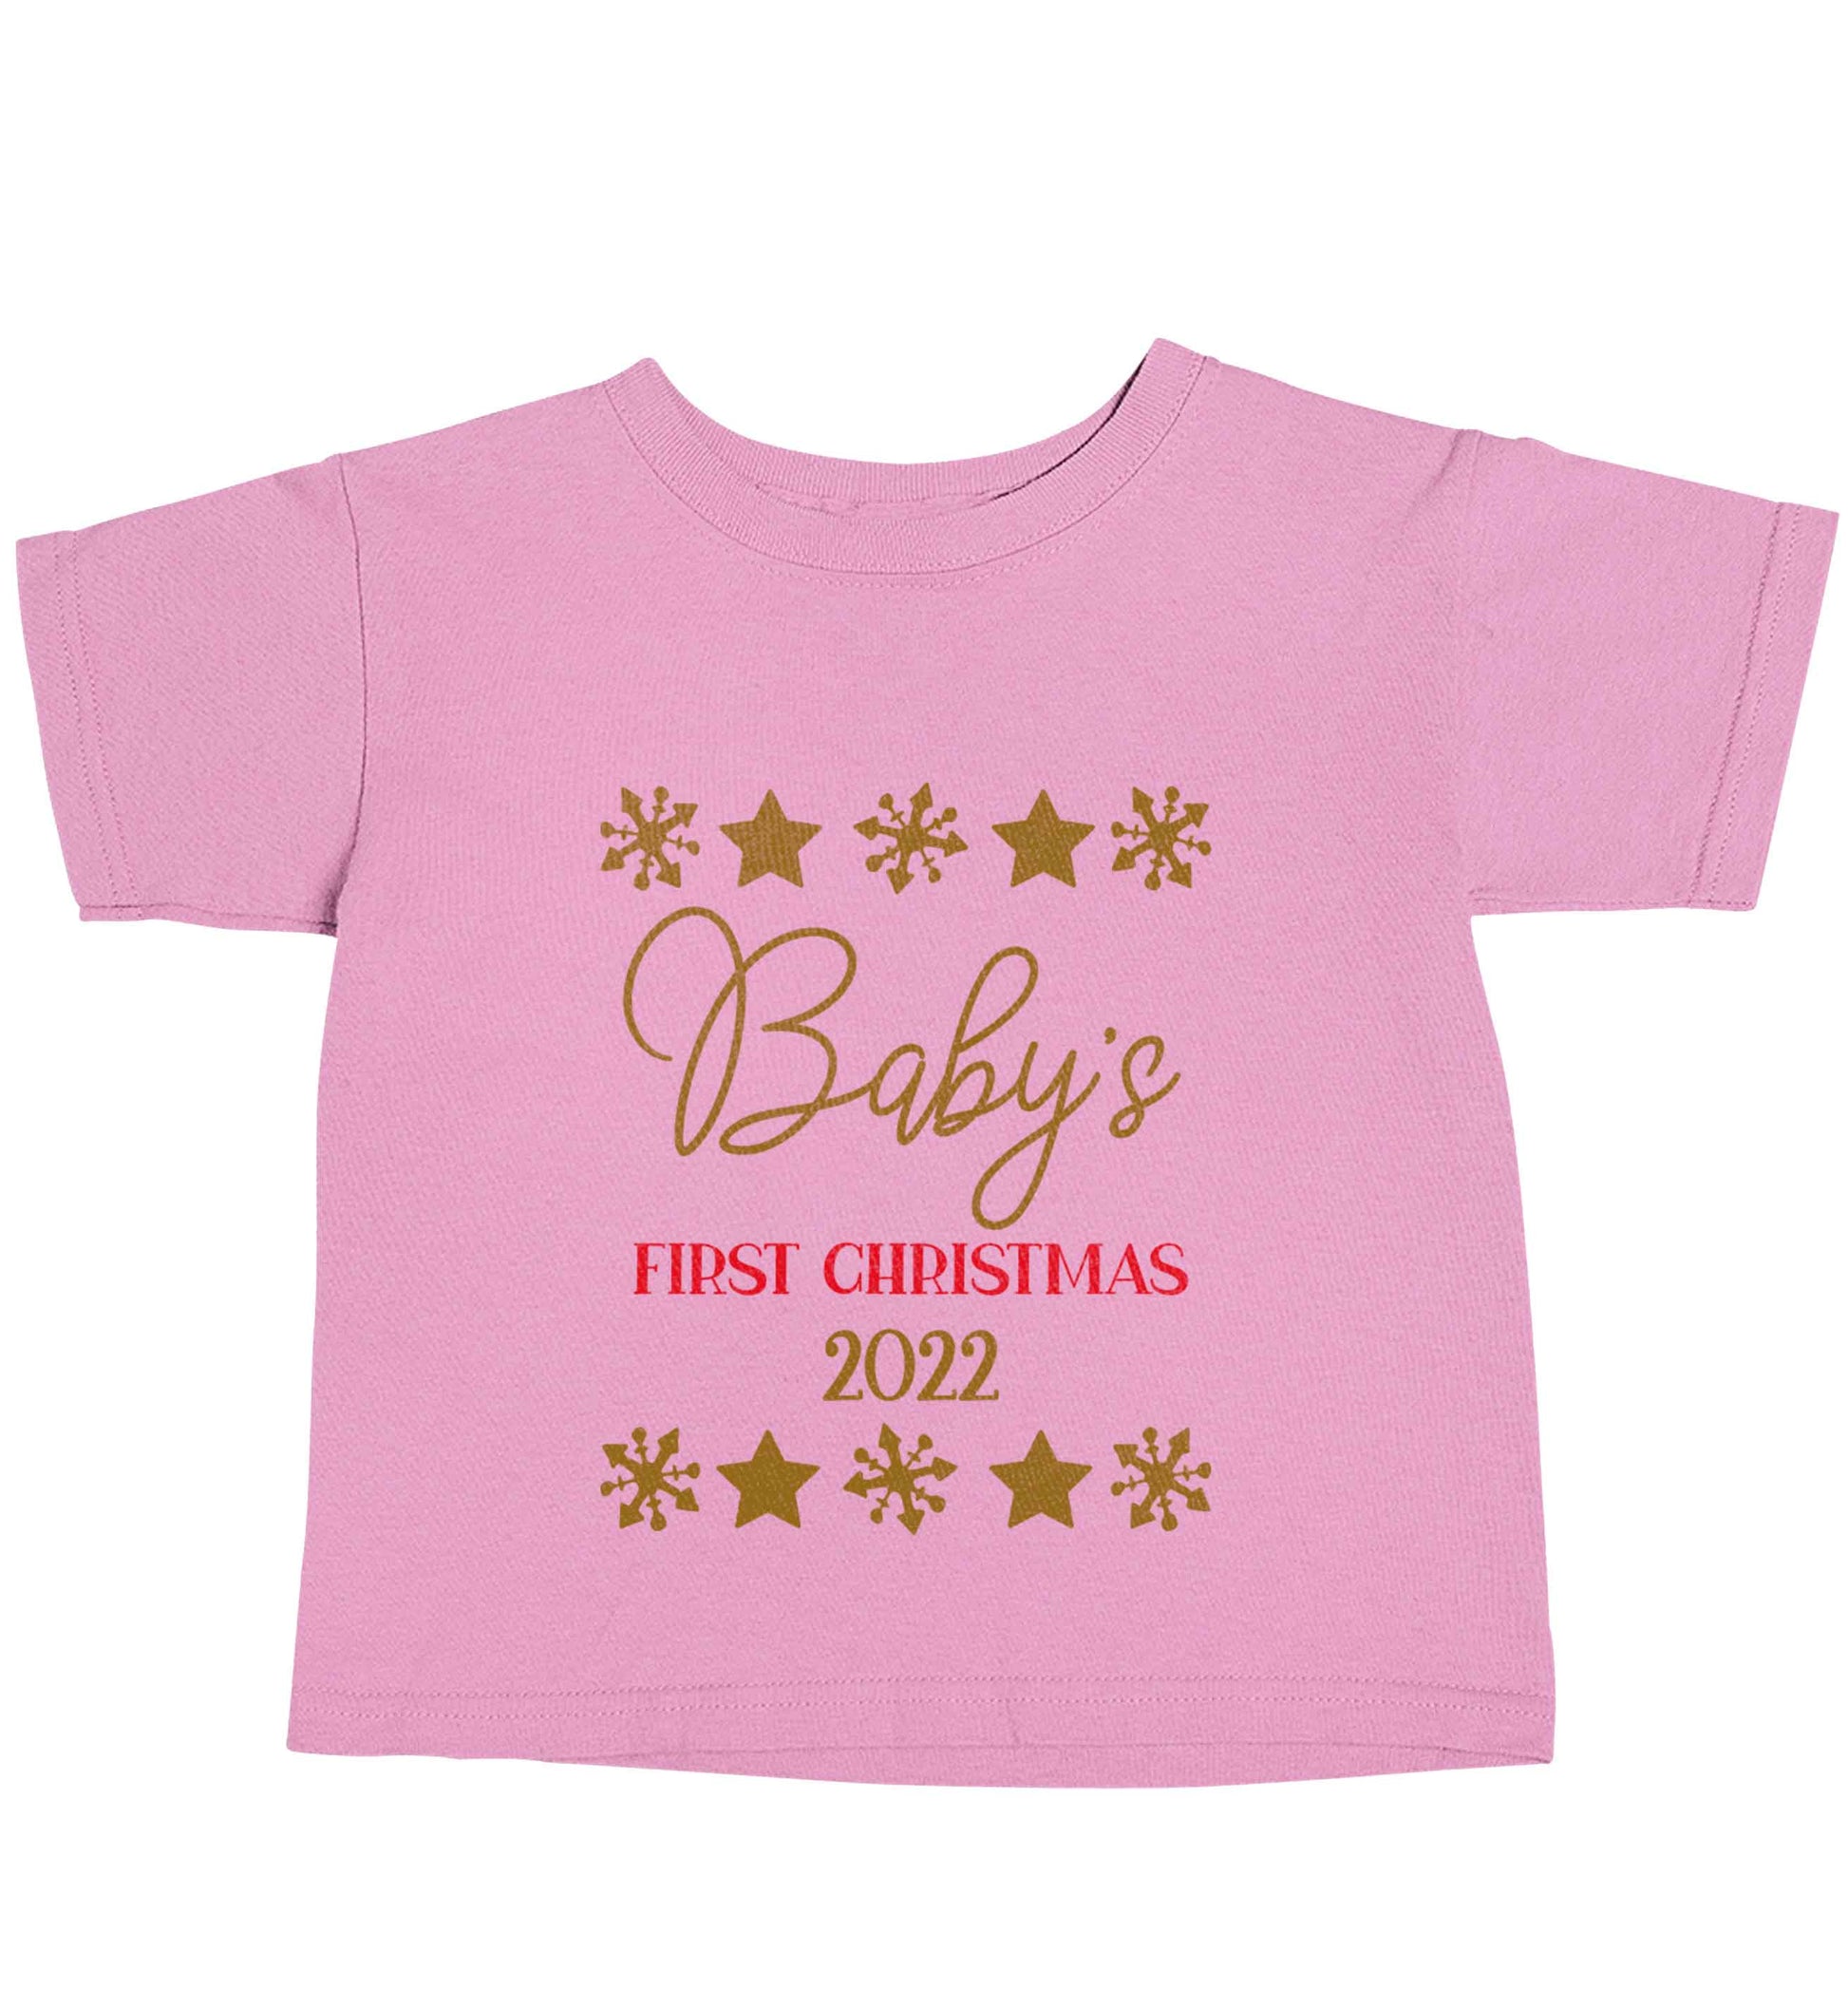 Baby's first Christmas light pink baby toddler Tshirt 2 Years